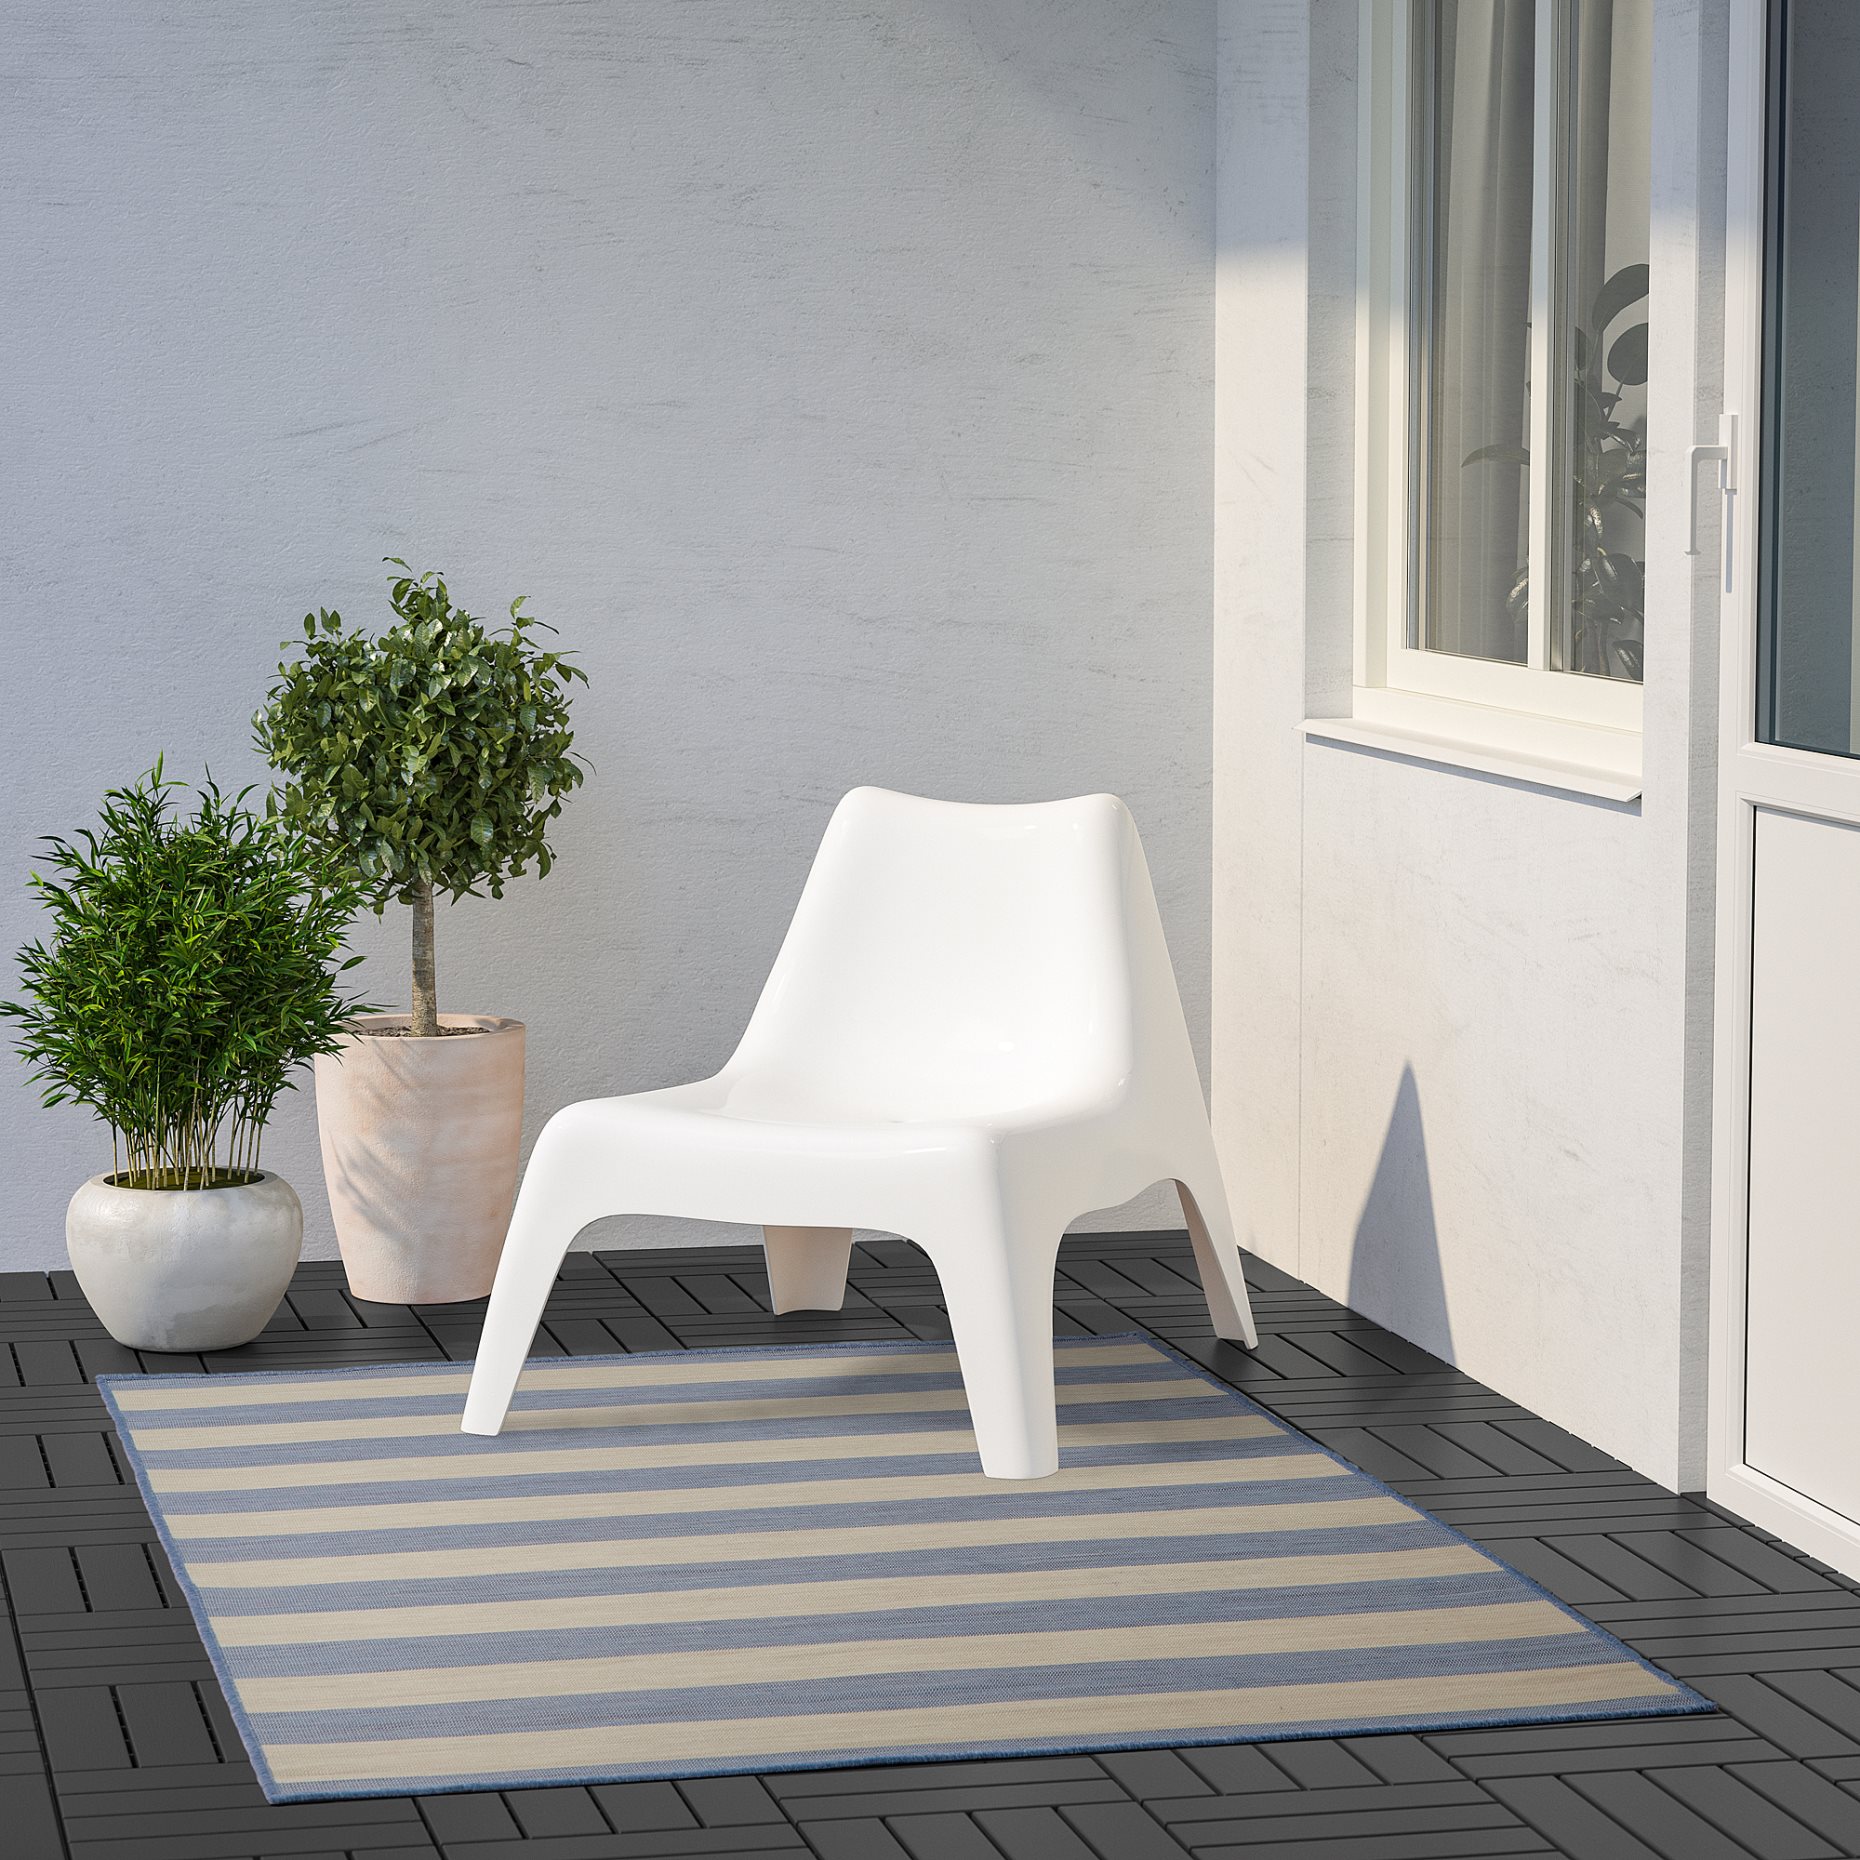 VRENSTED, rug flatwoven, in/outdoor, 133x195 cm, 204.951.99